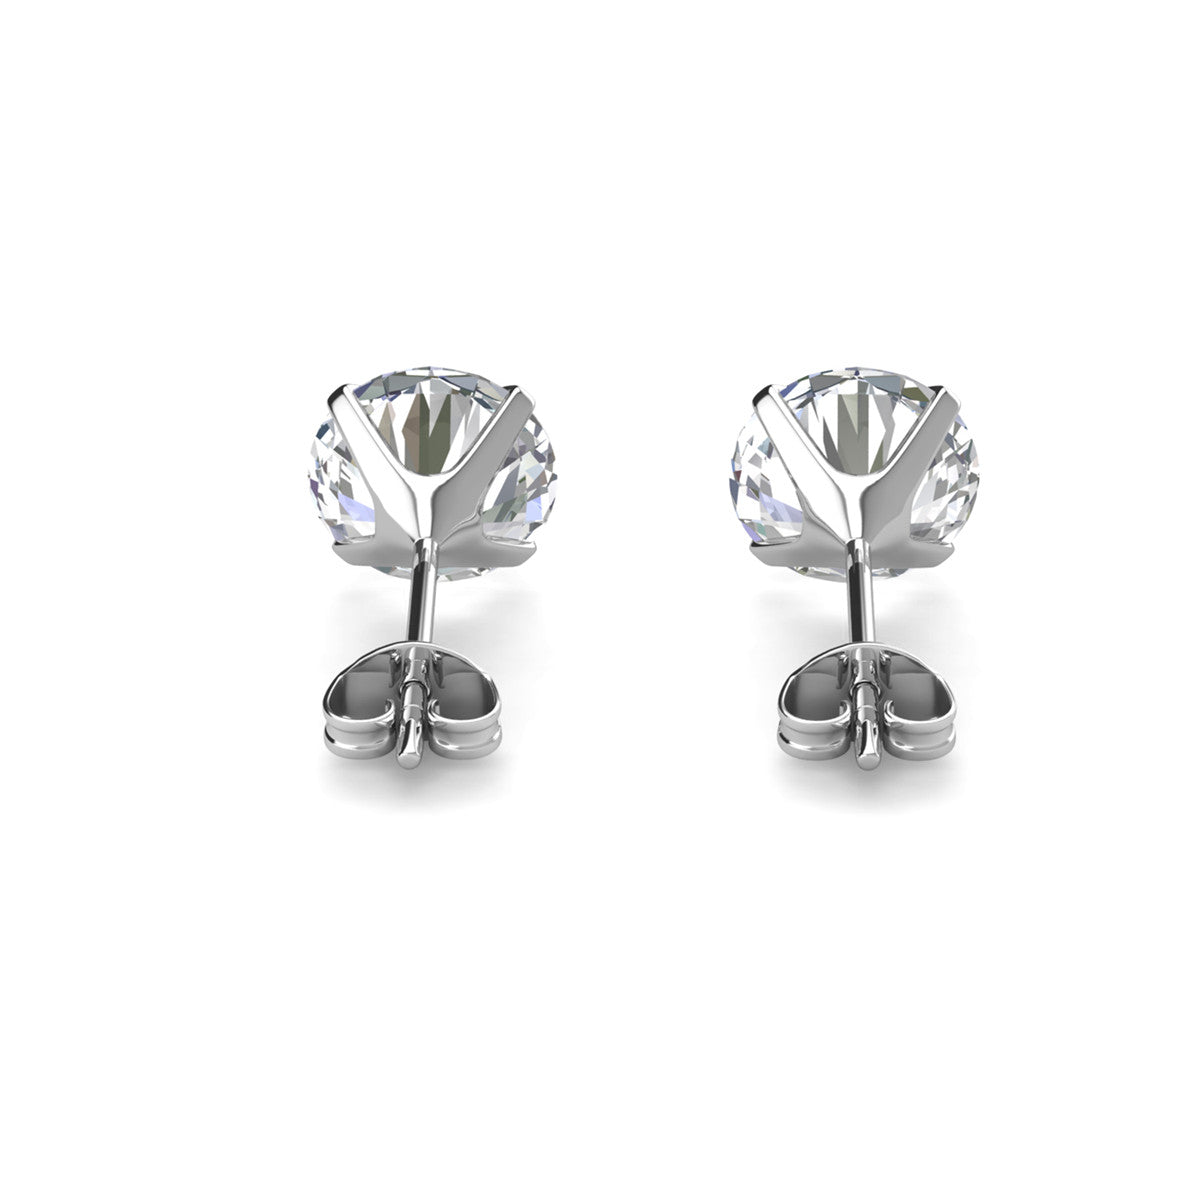 Moissanite by Cate & Chloe Vera Sterling Silver Stud Earrings with Moissanite Crystals